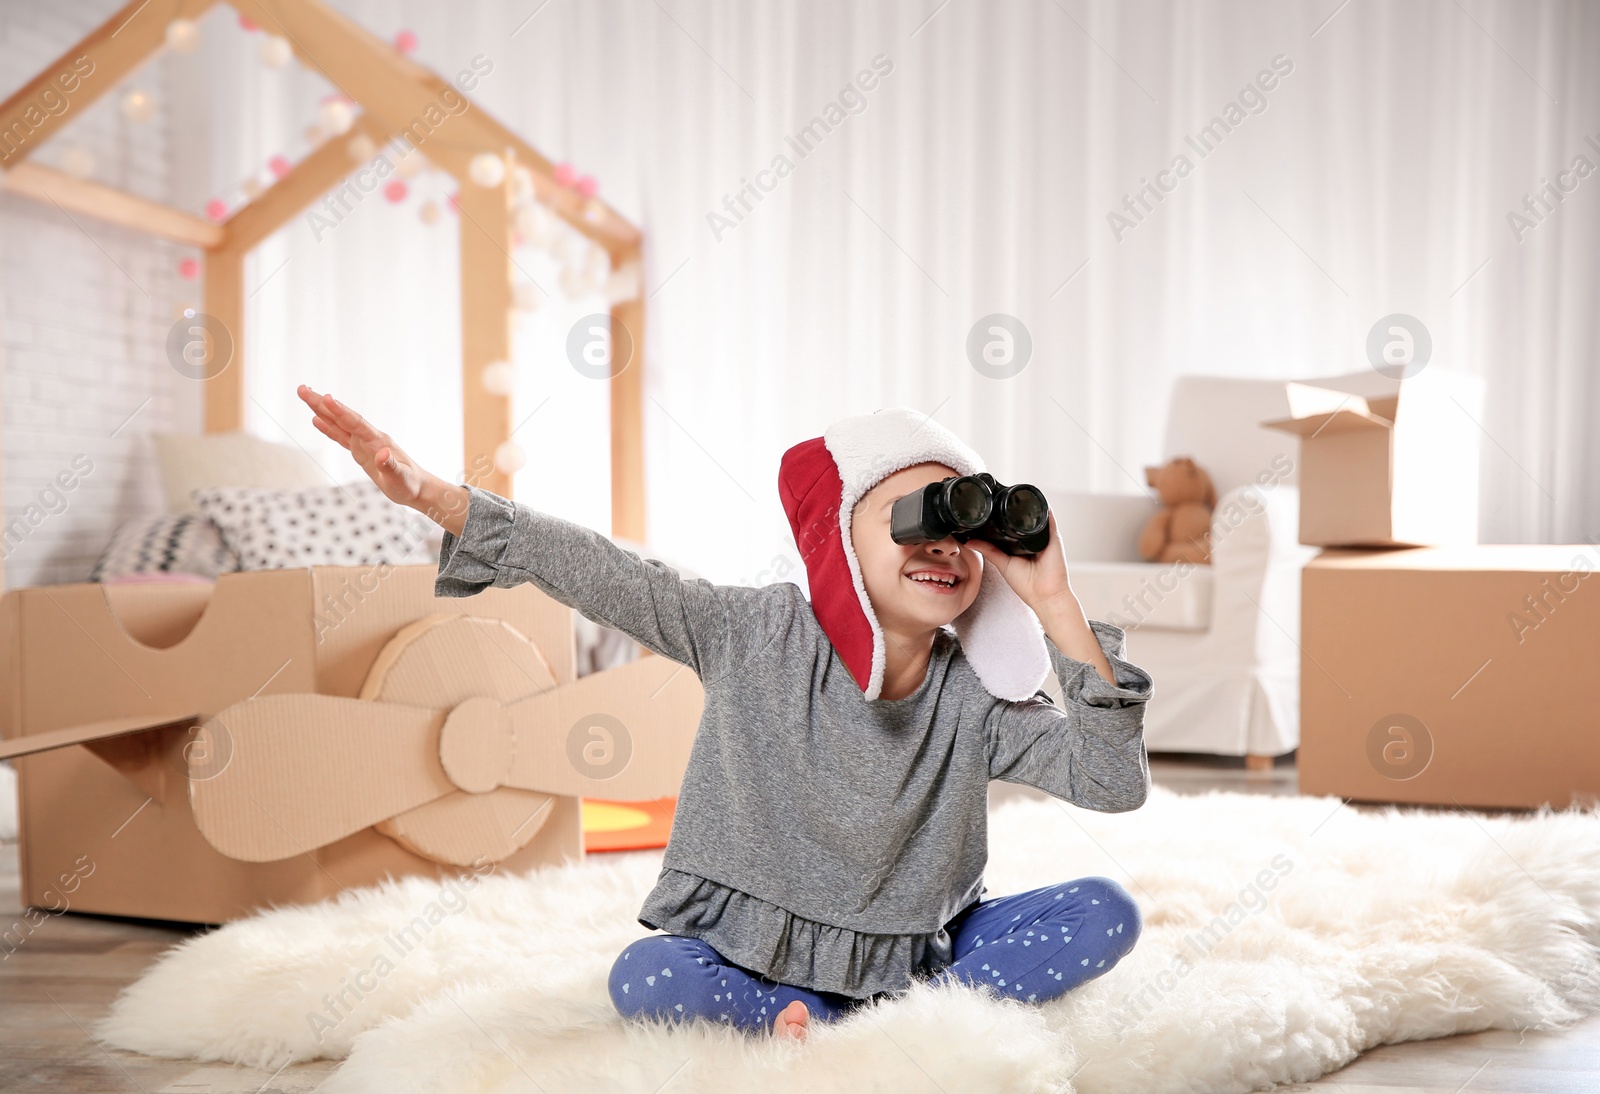 Photo of Cute little girl playing with binoculars and cardboard airplane in bedroom